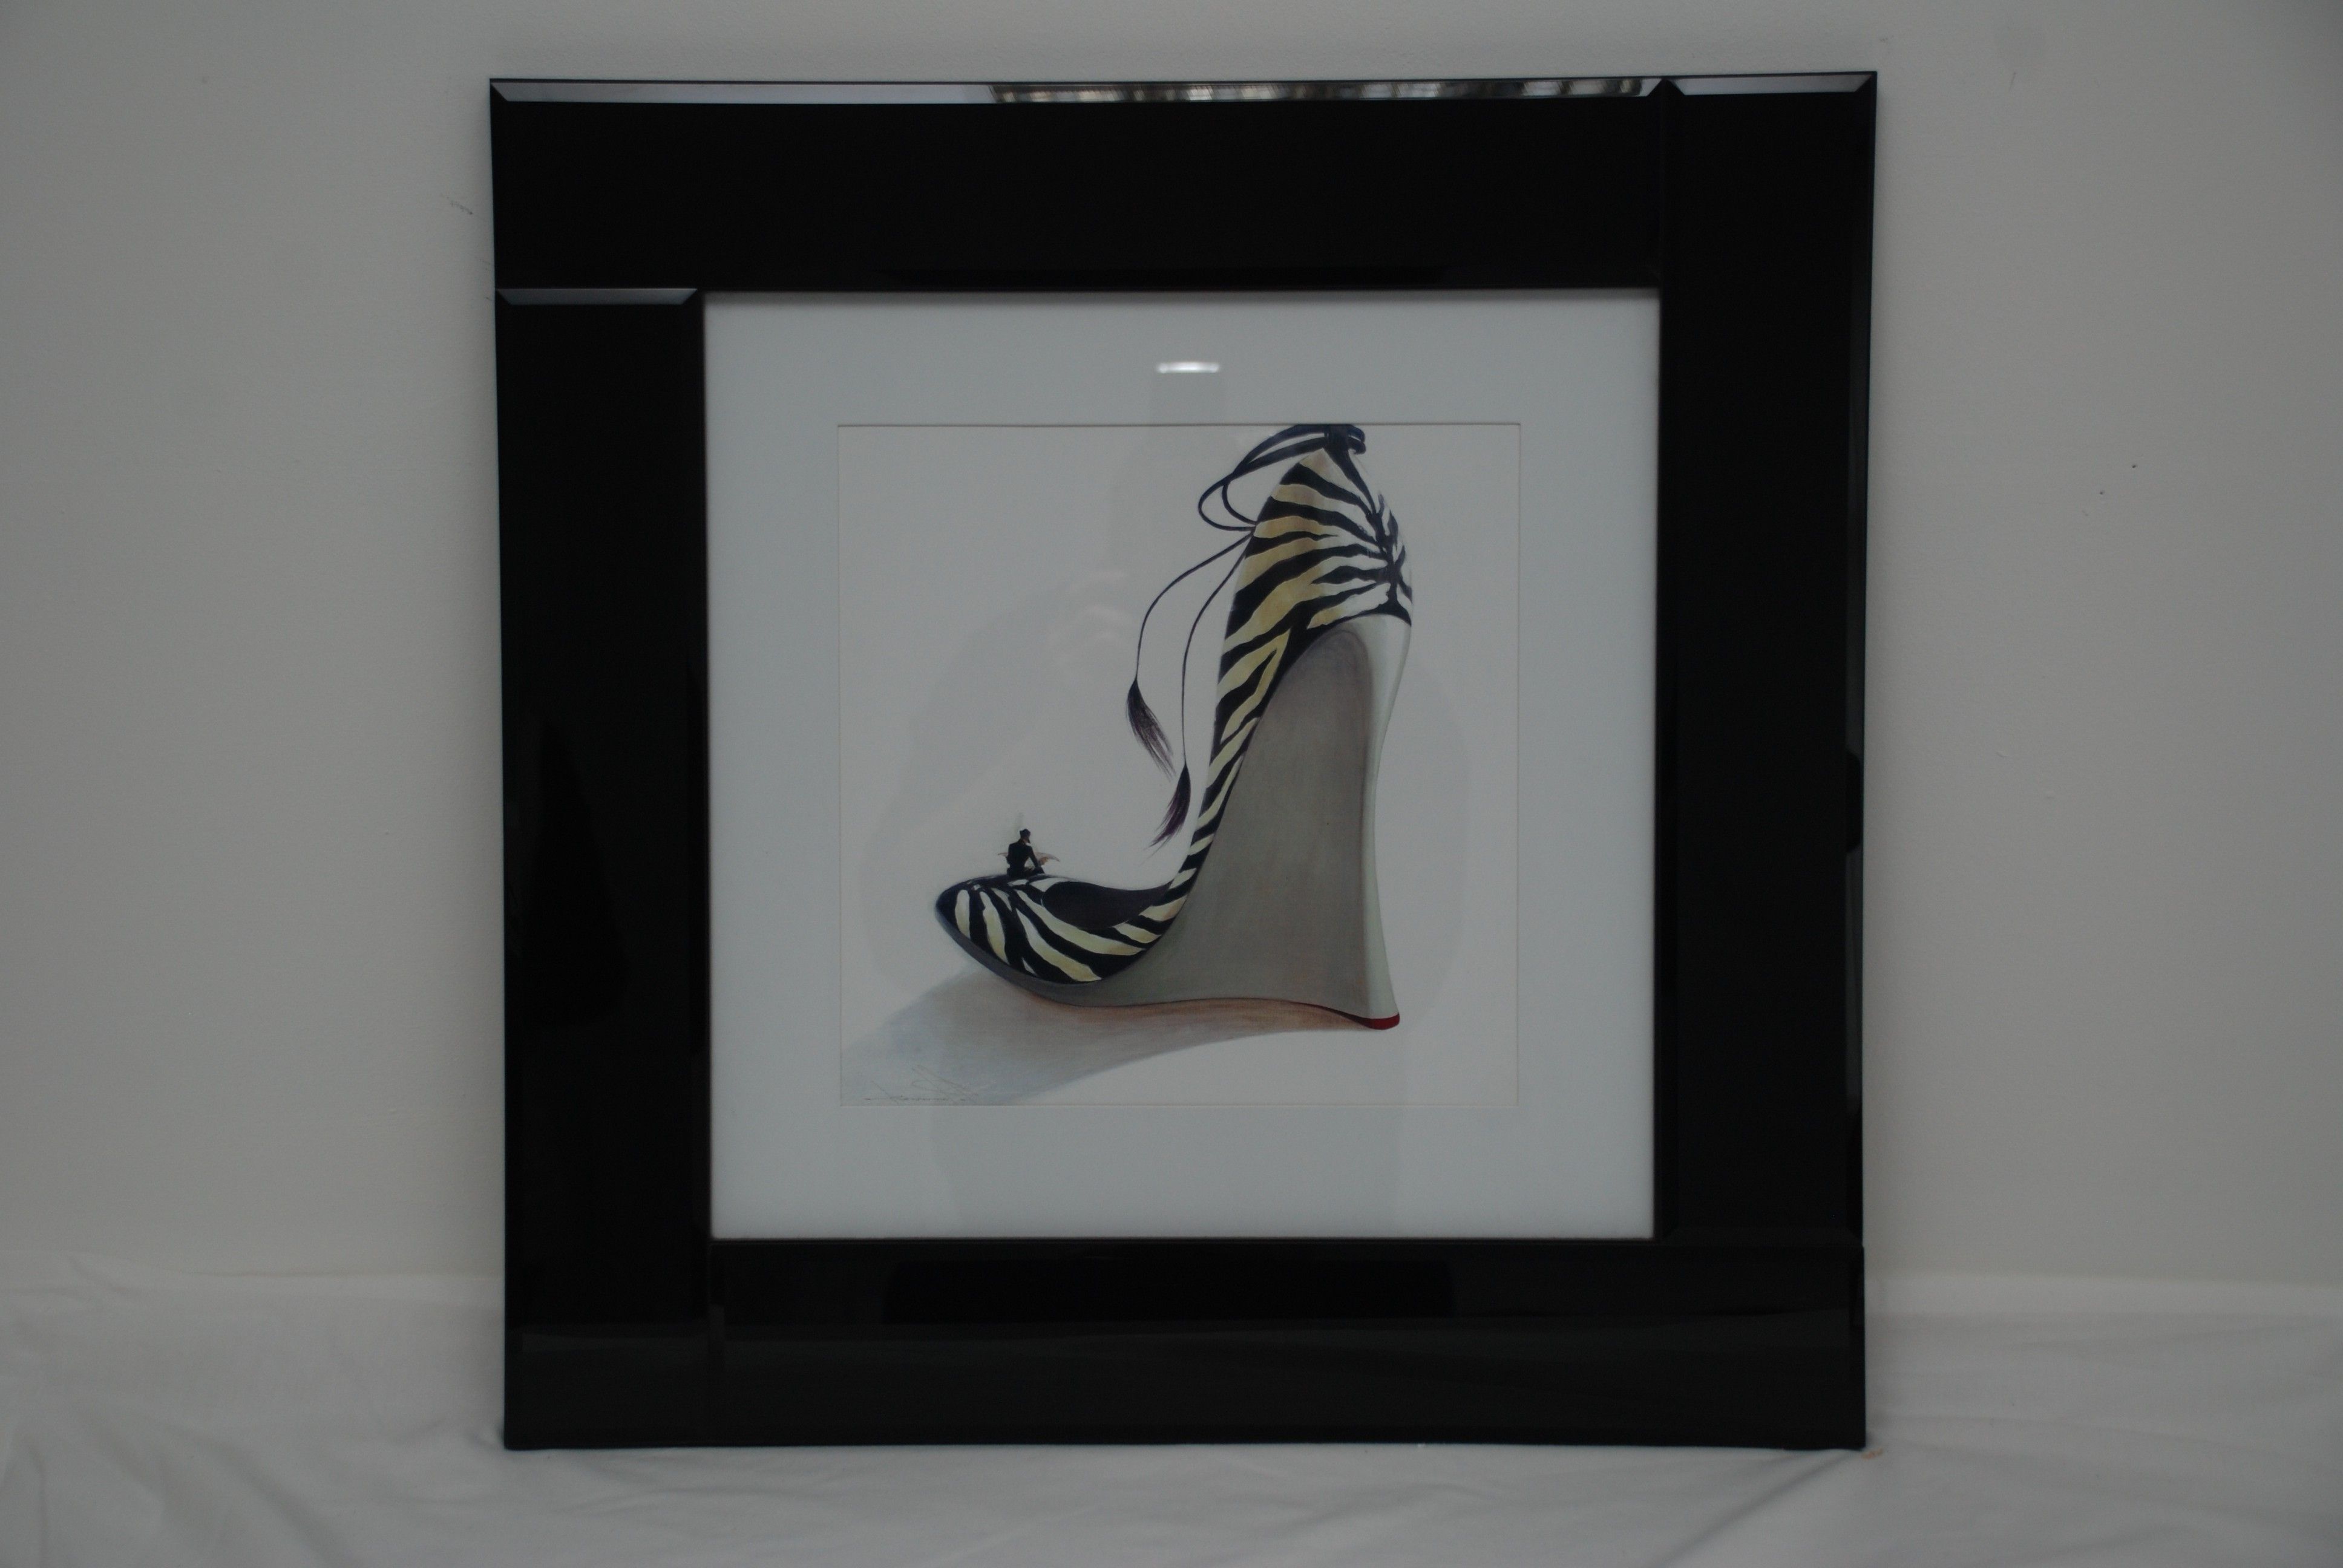 2017 Wall Art Designs: Black Wall Art Square Framed Beautiful Shoes Within Mirrored Frame Wall Art (View 8 of 15)